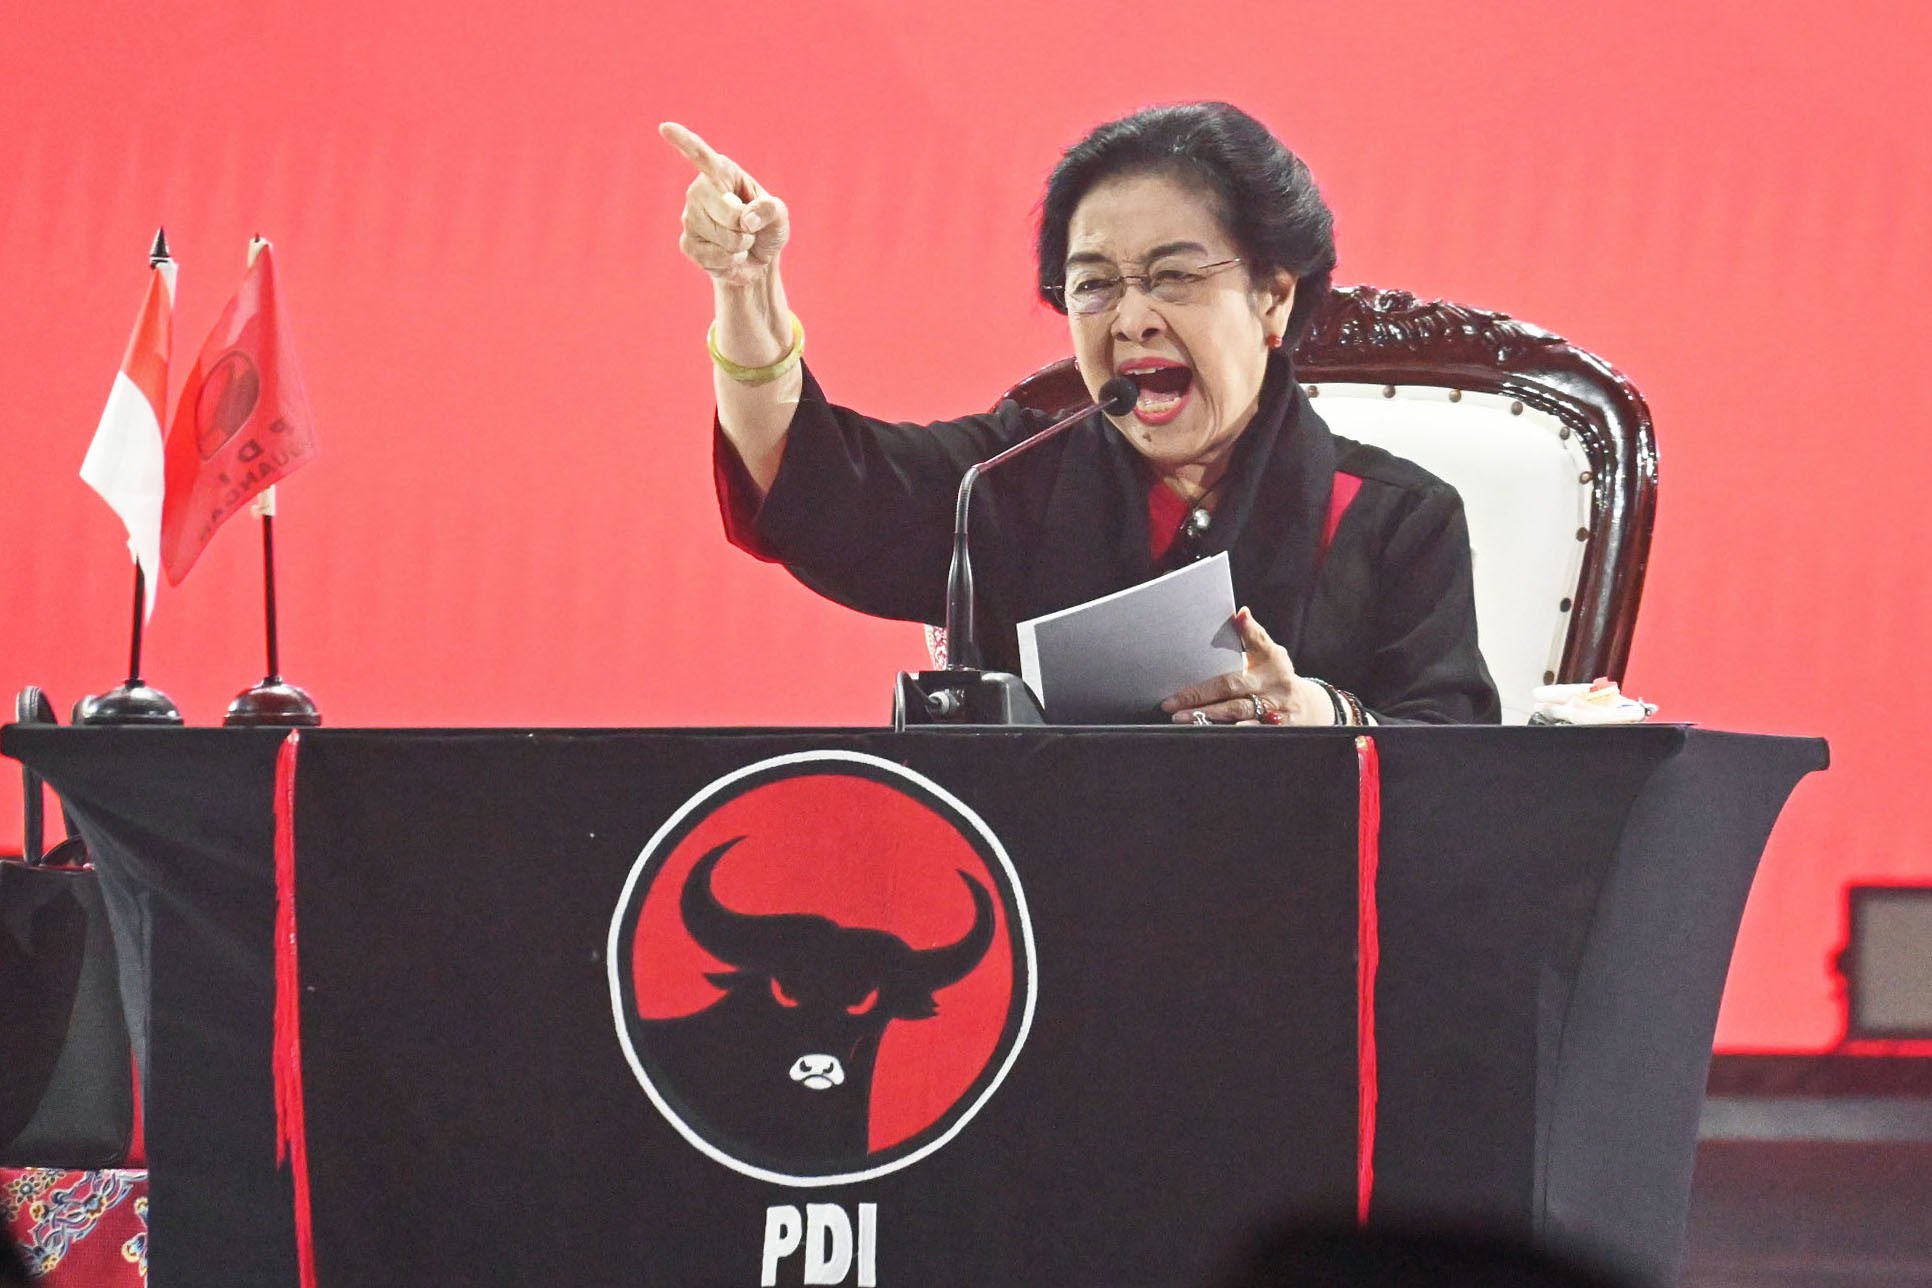 Former Indonesian president Megawati Sukarnoputri during an event in Jakarta on May 24. Photo: Kyodo